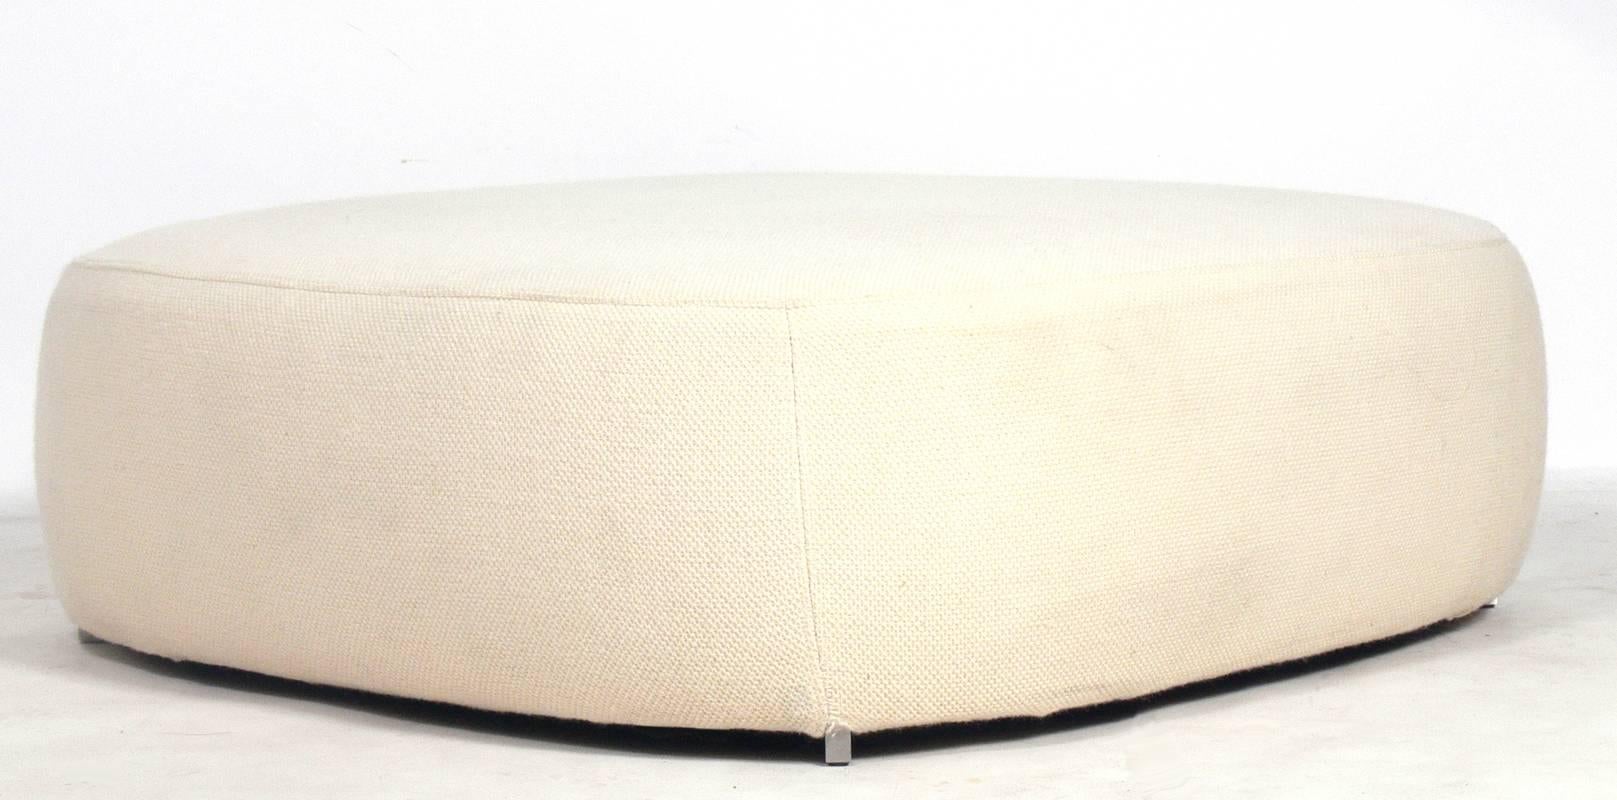 Large Scale Square Modern Ottoman, designed by Piero Lissoni for Fritz Hansen, circa 2006. Clean lined modern design with four simple stainless steel feet. This piece needs to be reupholstered and the price INCLUDES reupholstery in your fabric.